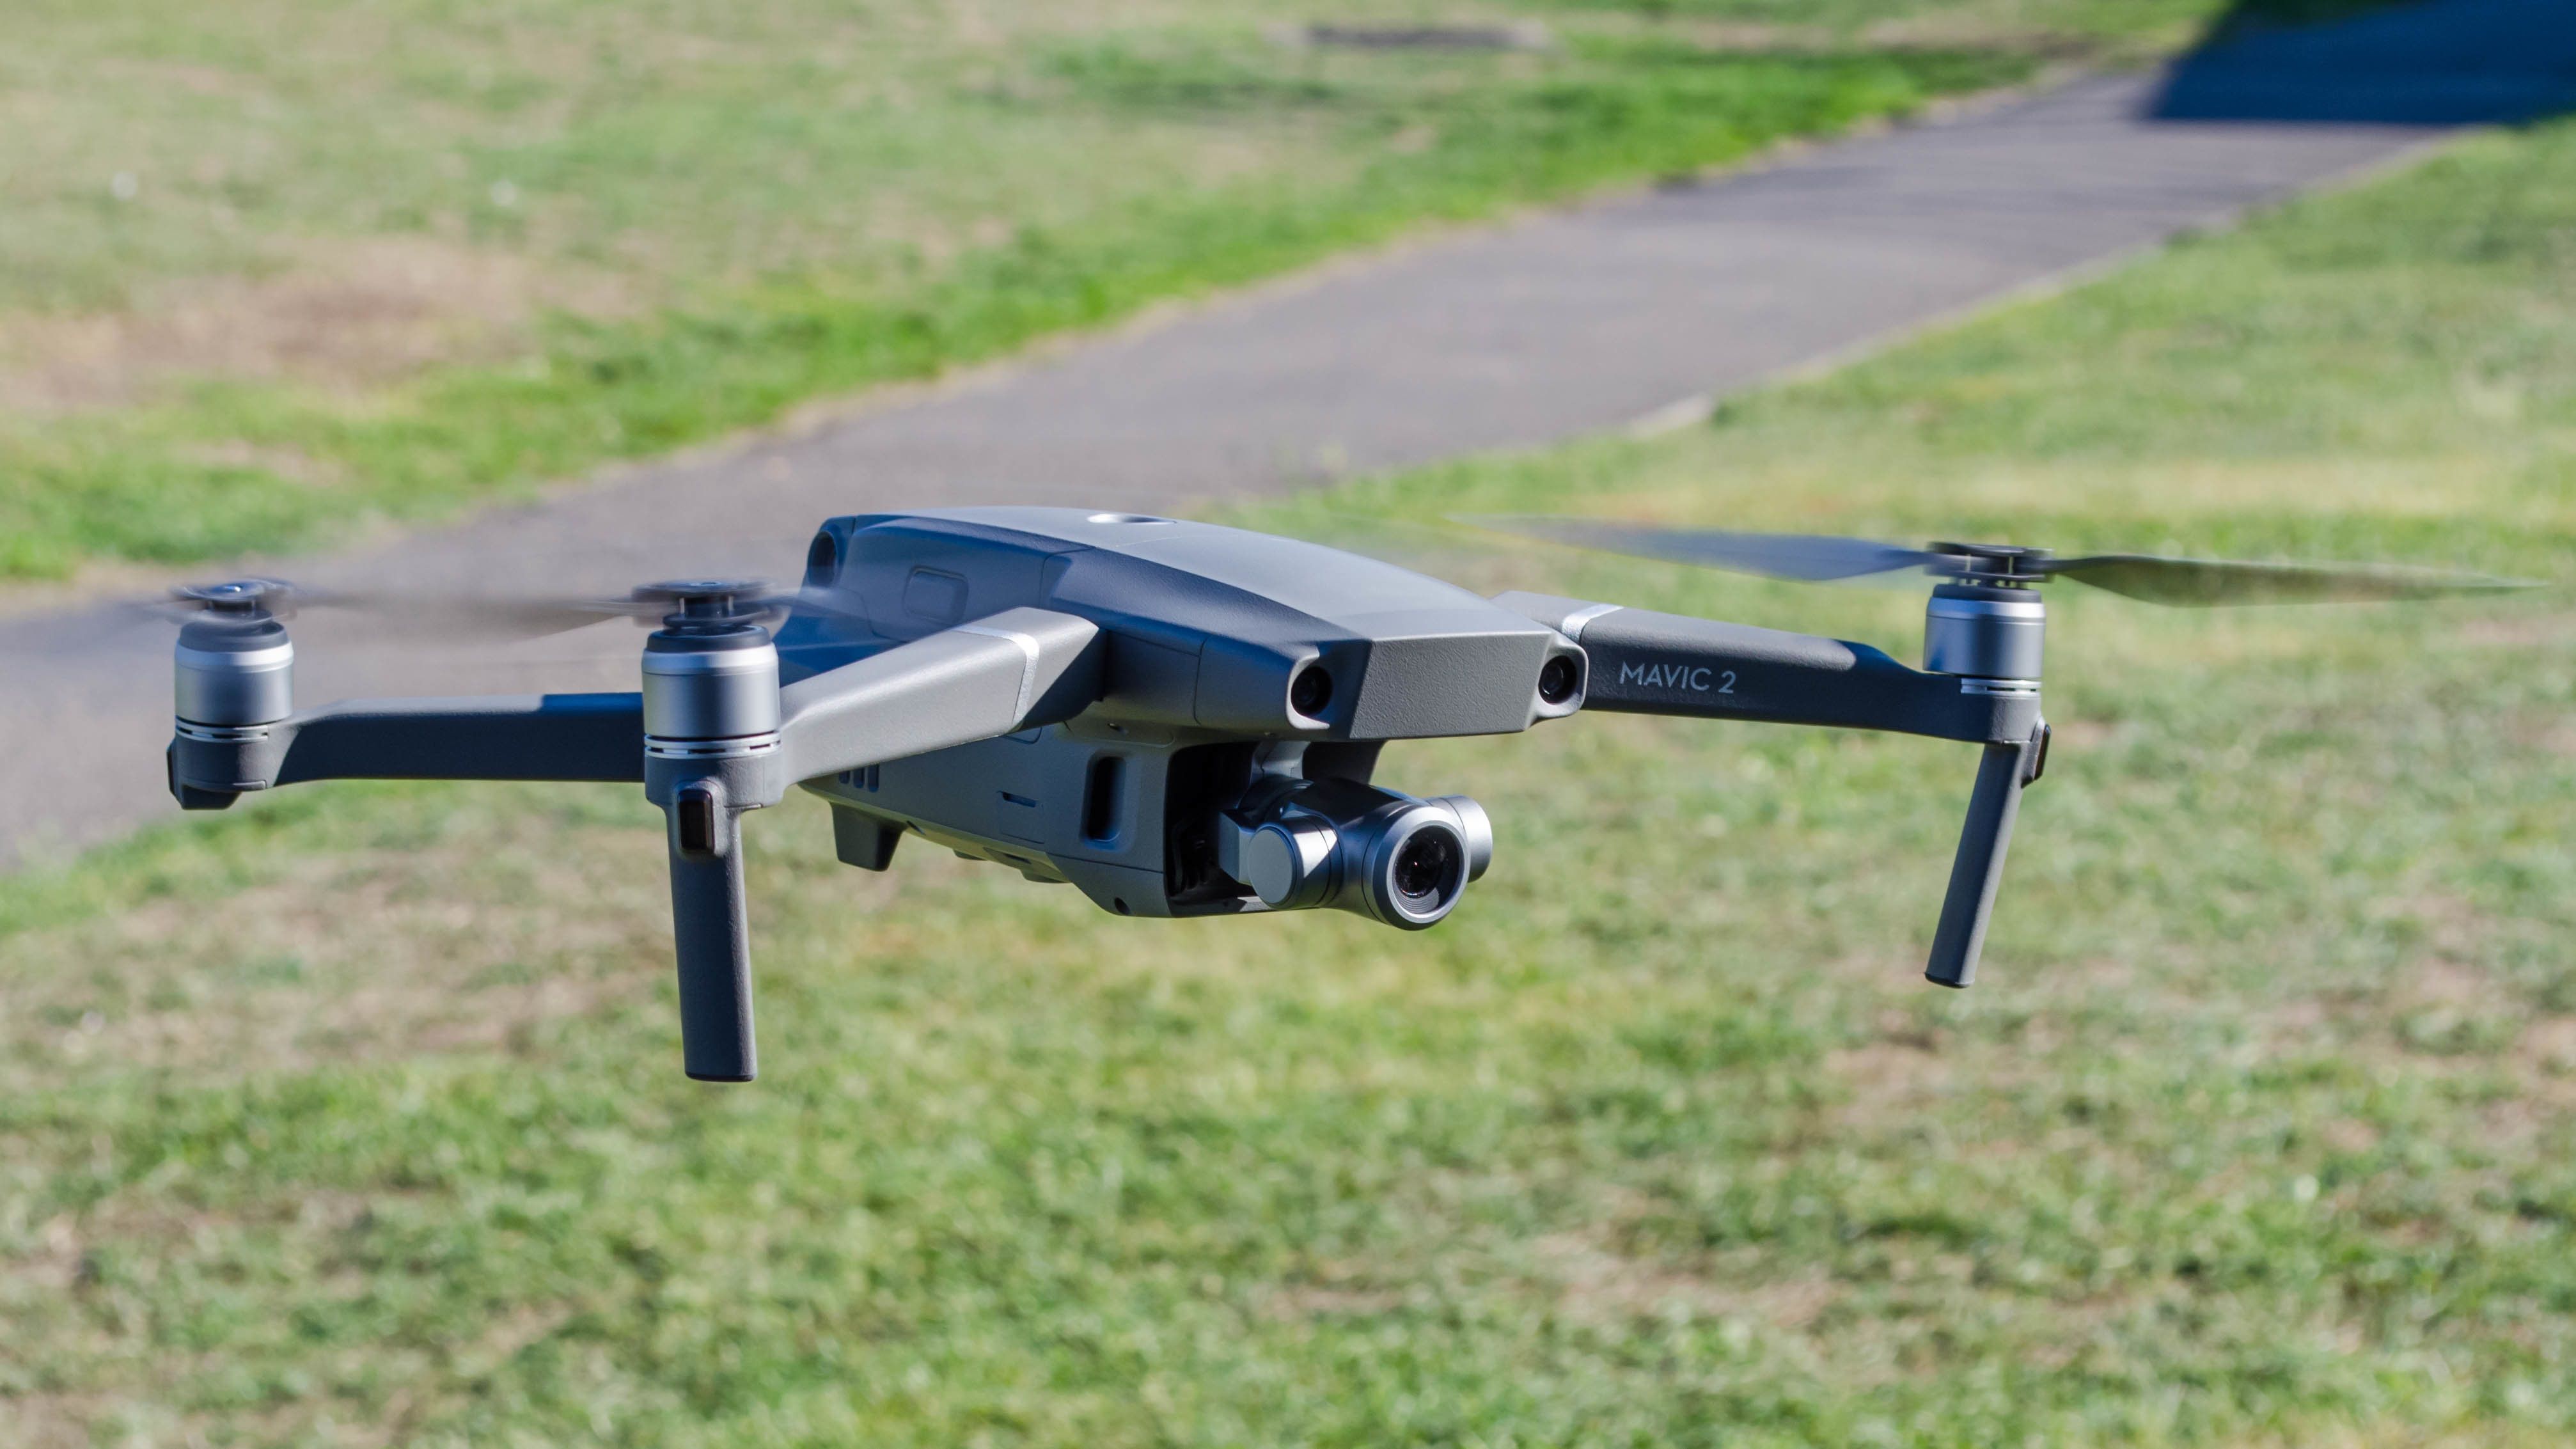 DJI Mavic 2 review: Quieter, faster, and with optical zoom - Gearbrain